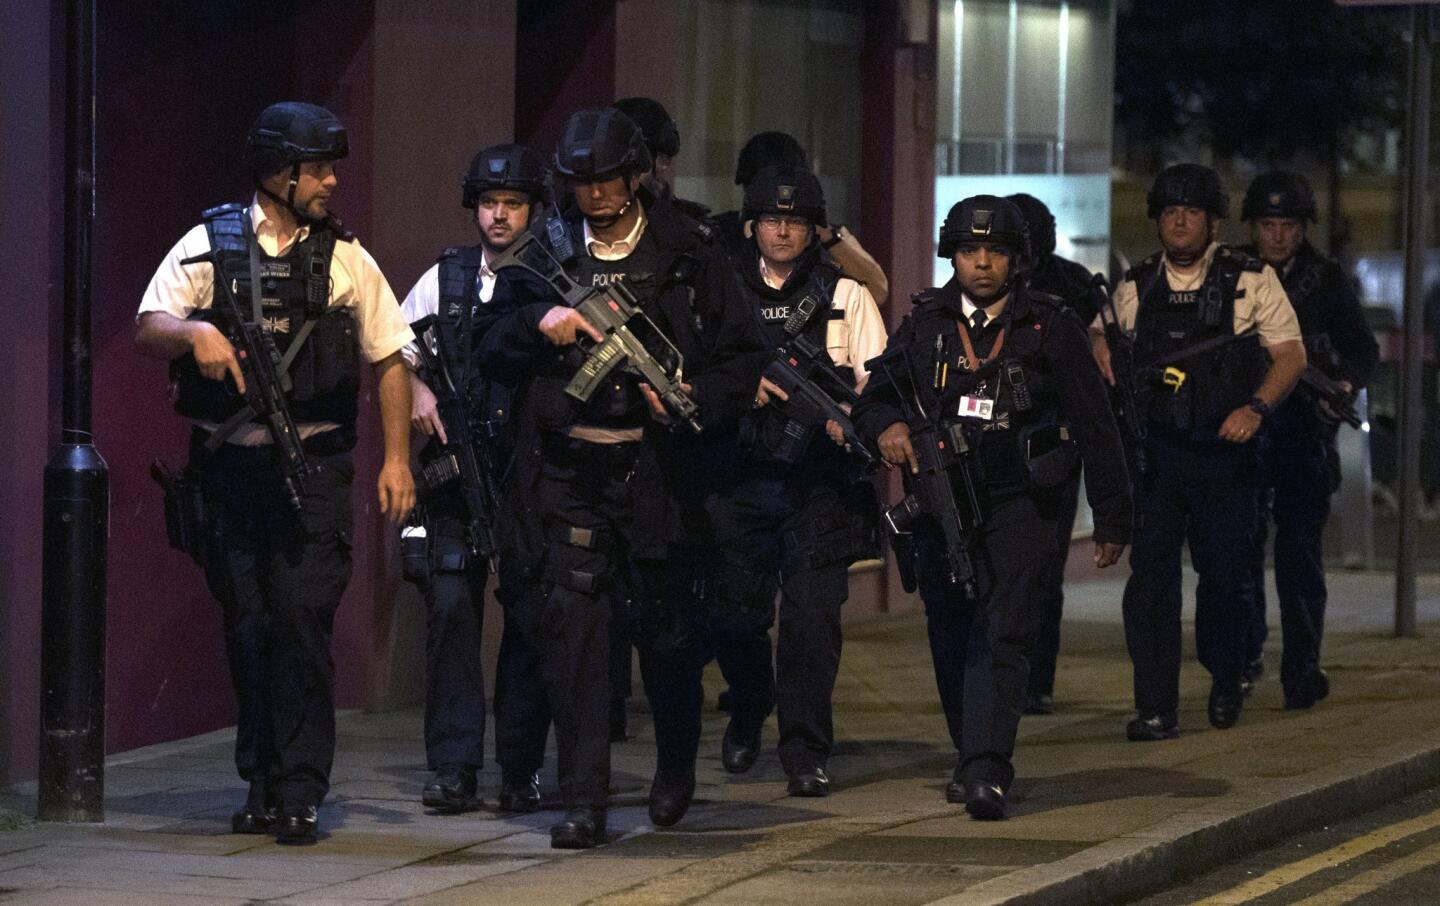 Police mobilize at London Bridge after reports of a van hitting pedestrians.